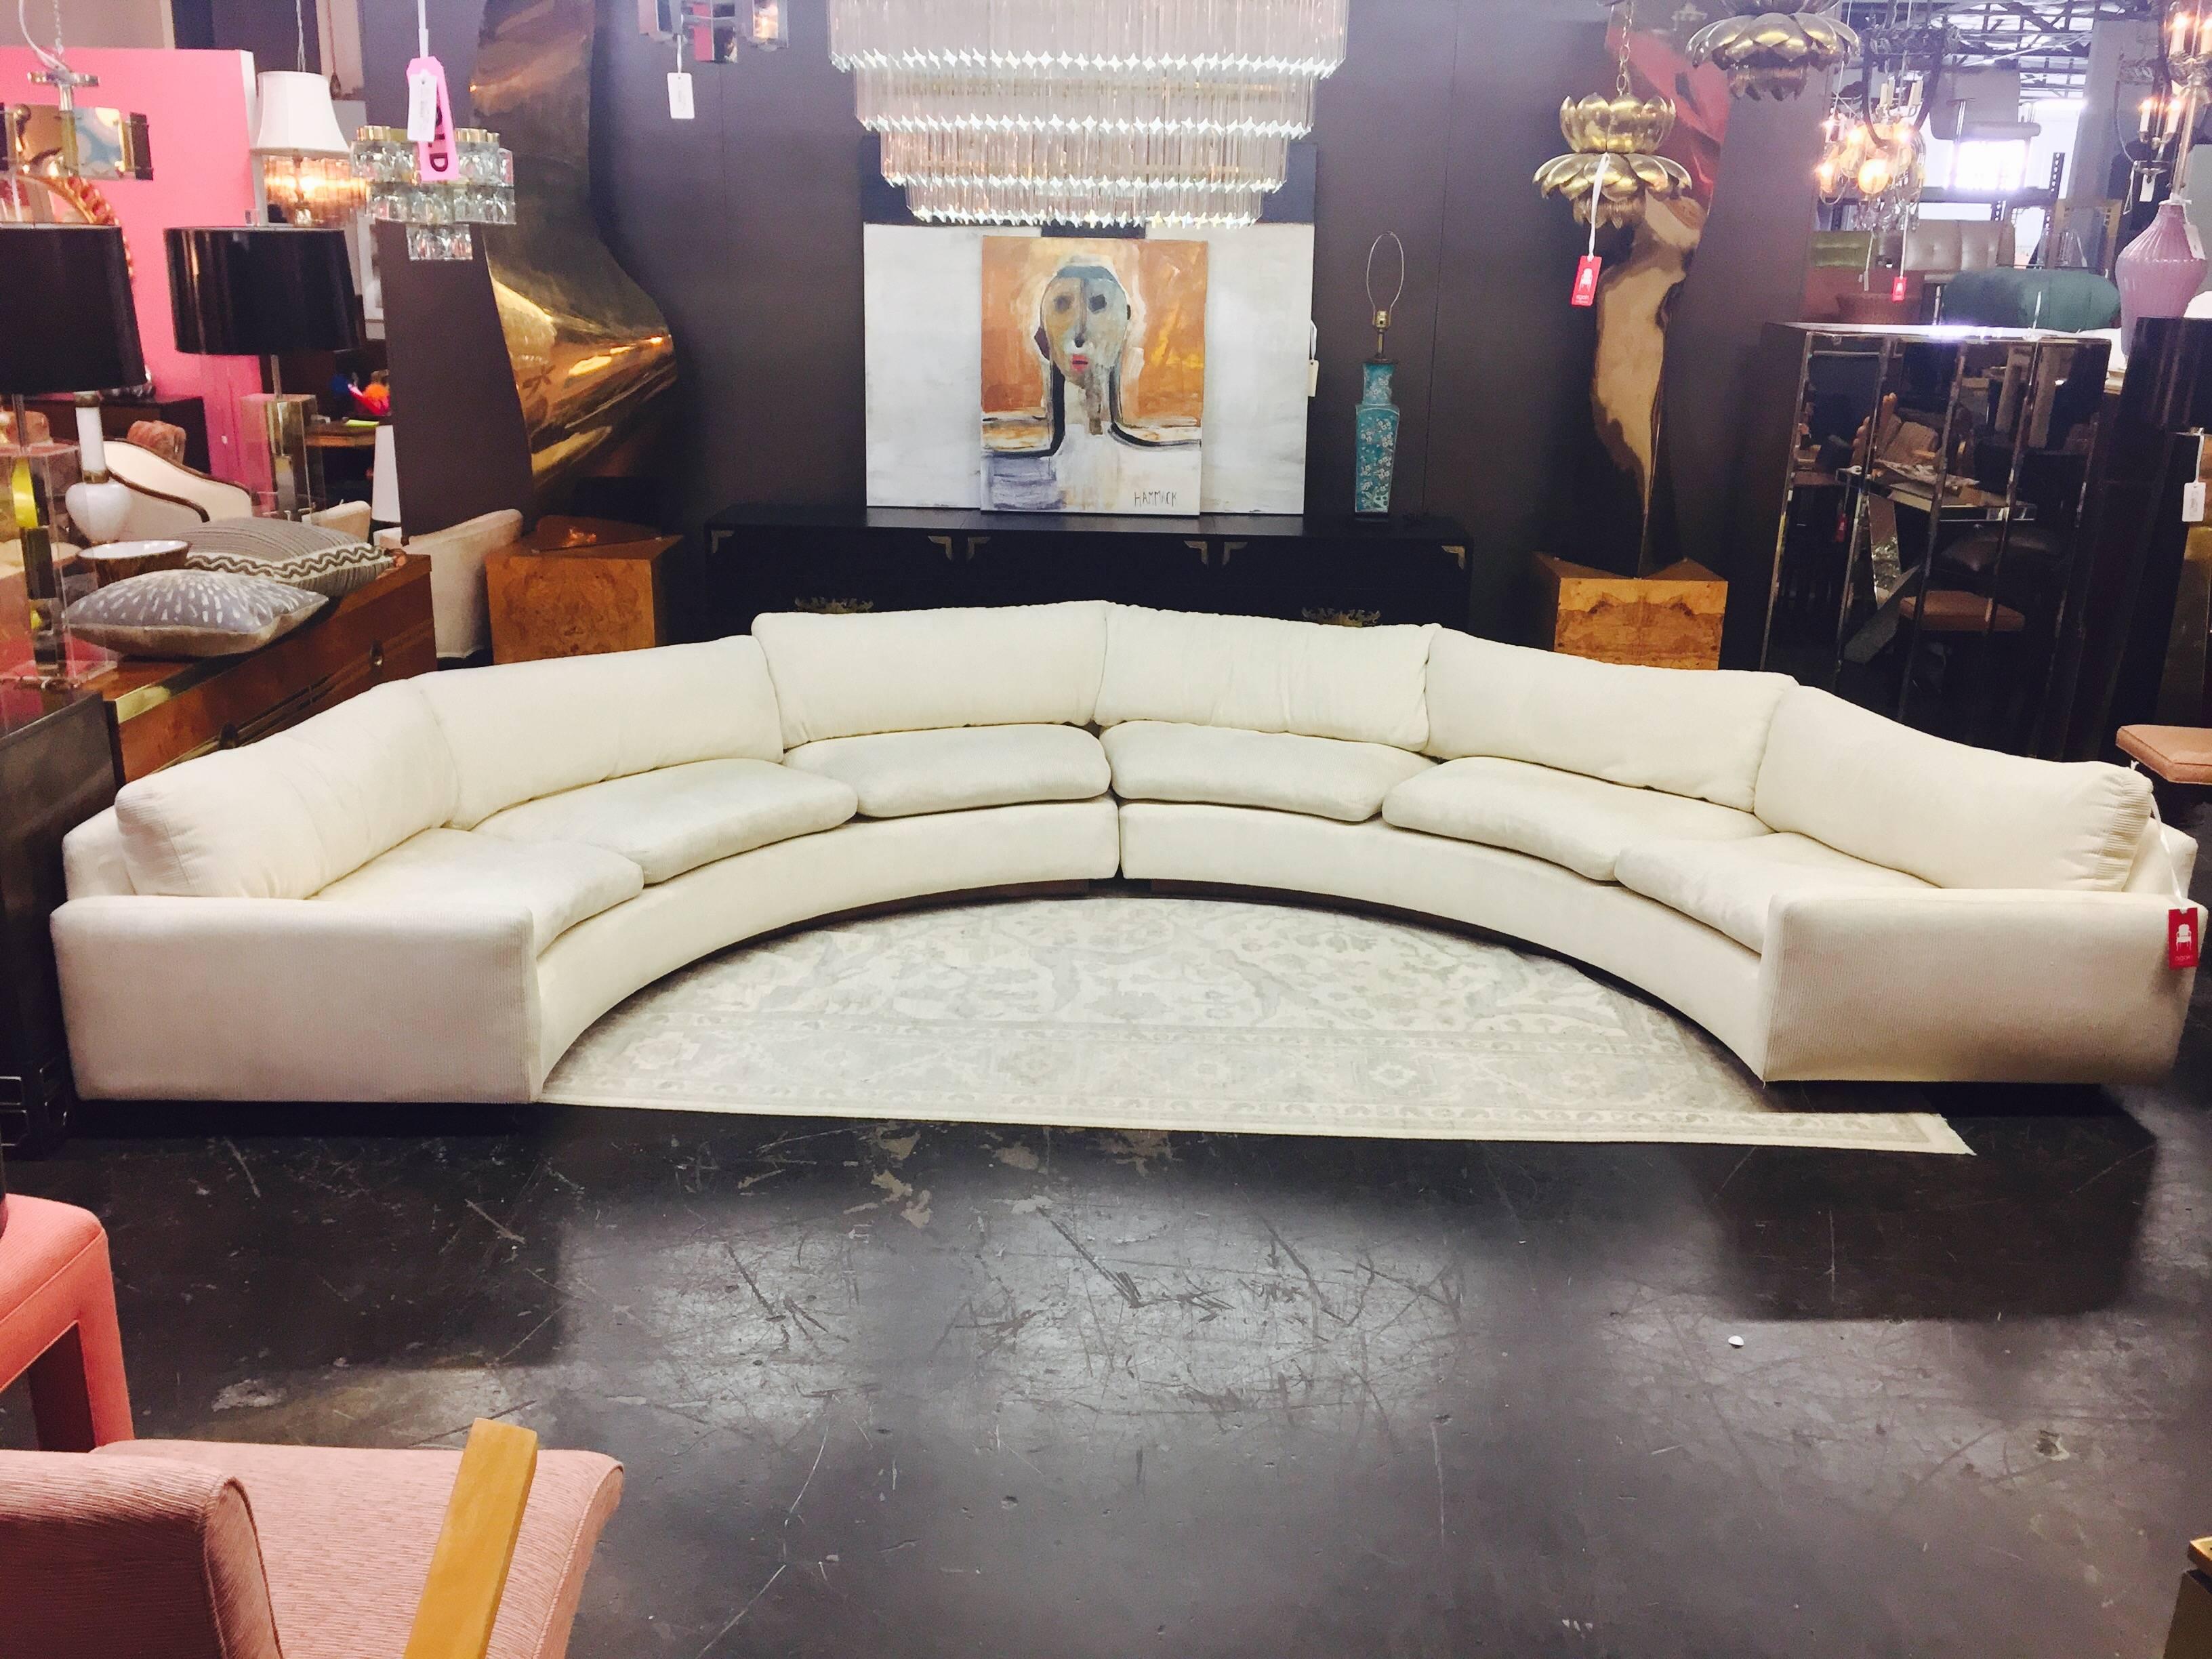 Two-piece. White semicircular sectional sofa by Milo Baughman with wood plinth base. Upholstery is in good vintage condition and needs cleaning.

Dimensions: 159